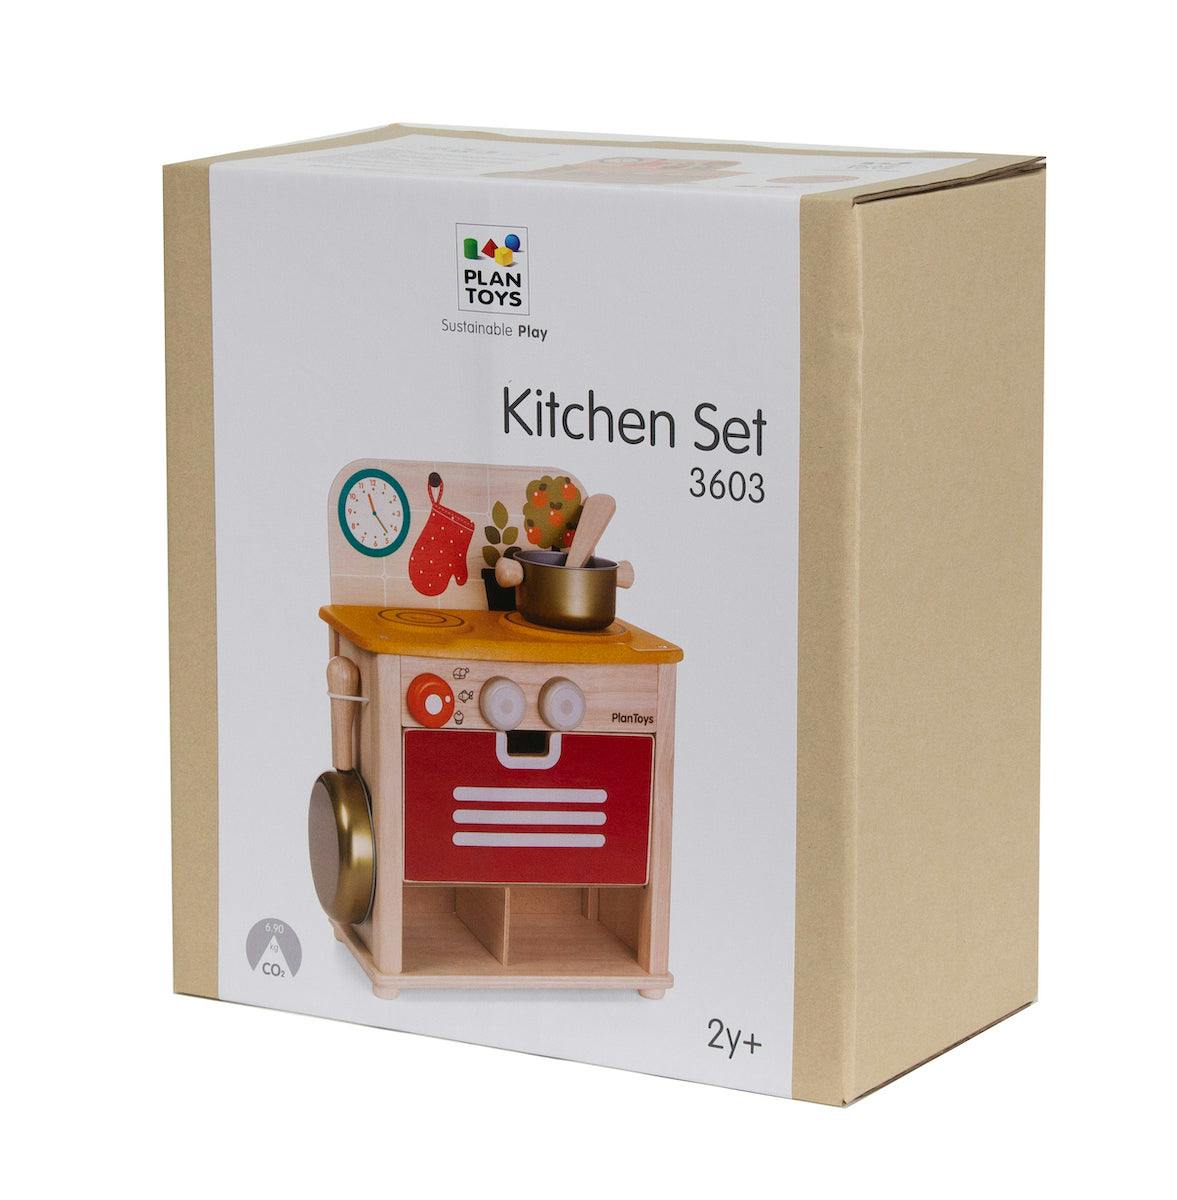 The Curated Kitchen Set